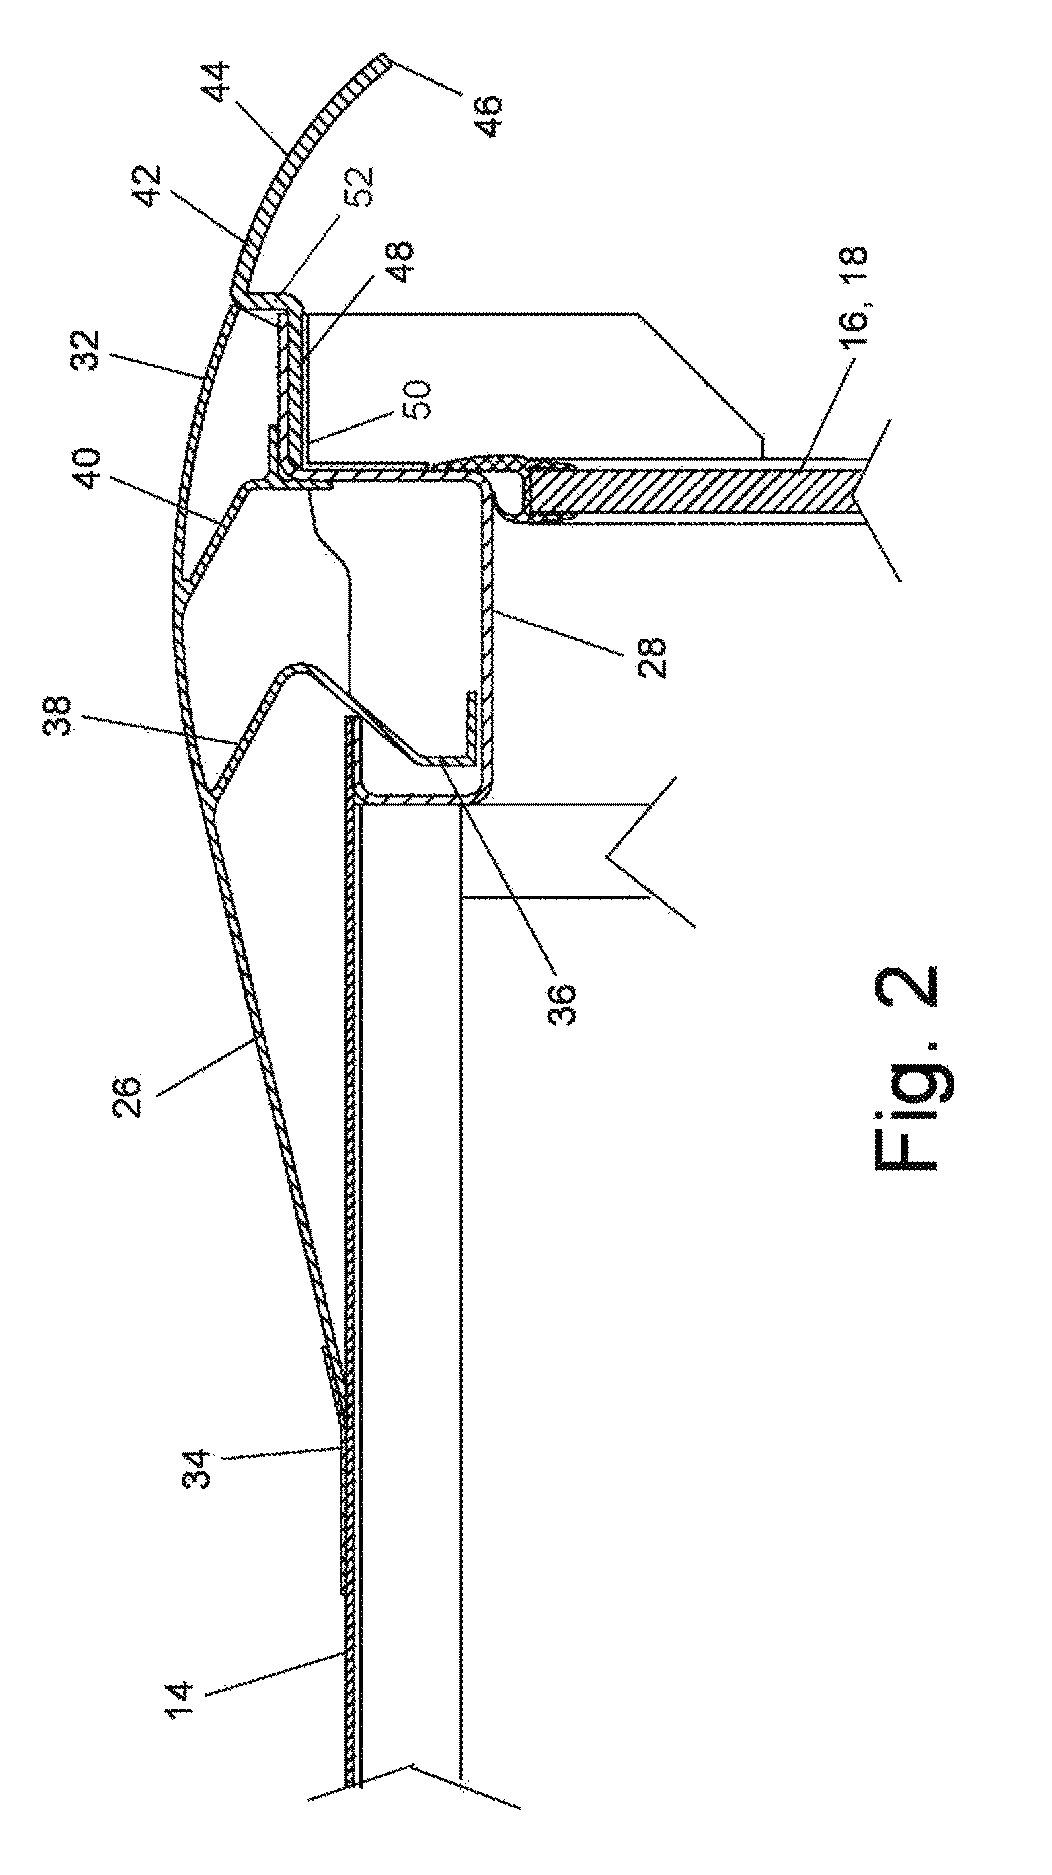 Rear fairing system for a vehicle